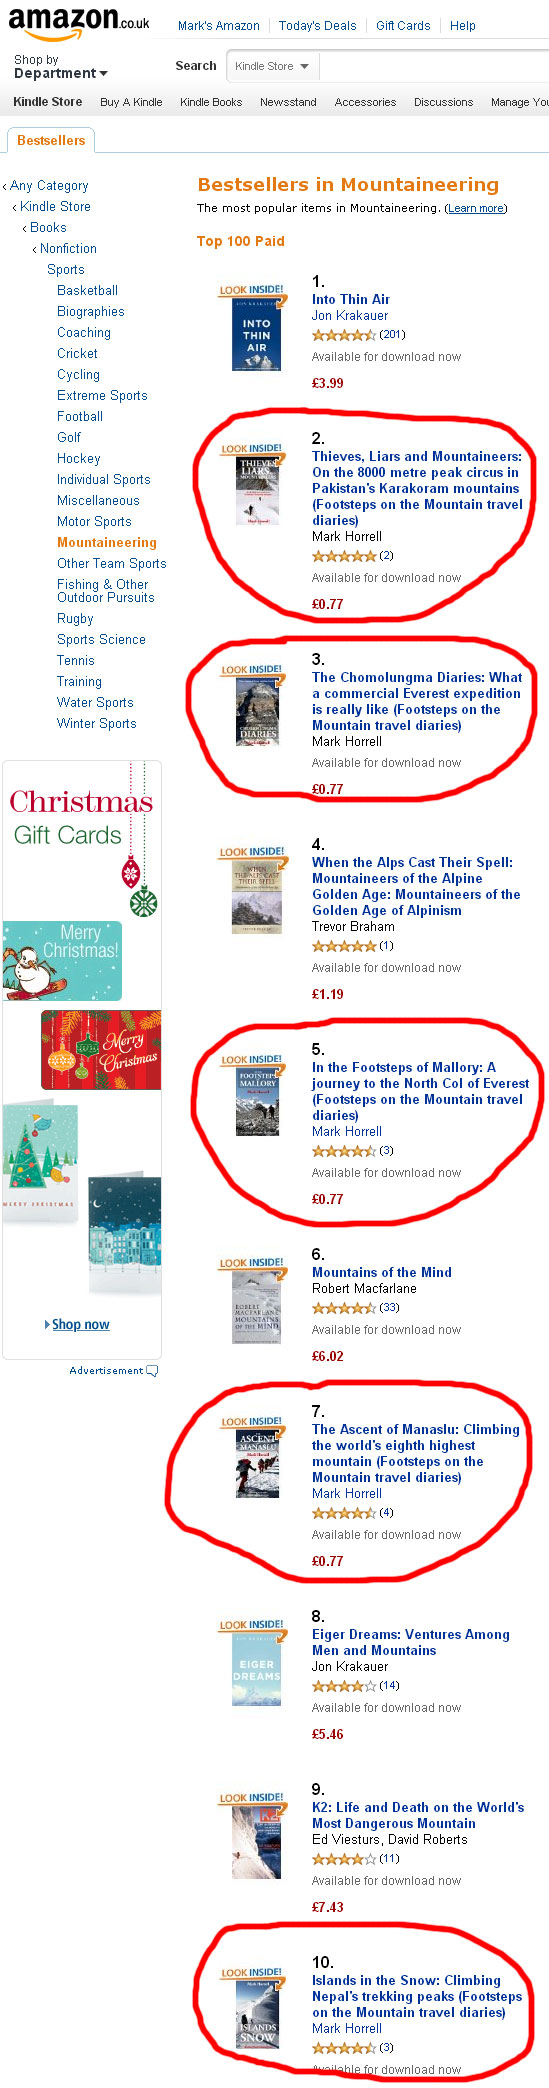 Evidence that Amazon UK readers quite like light-hearted travel books